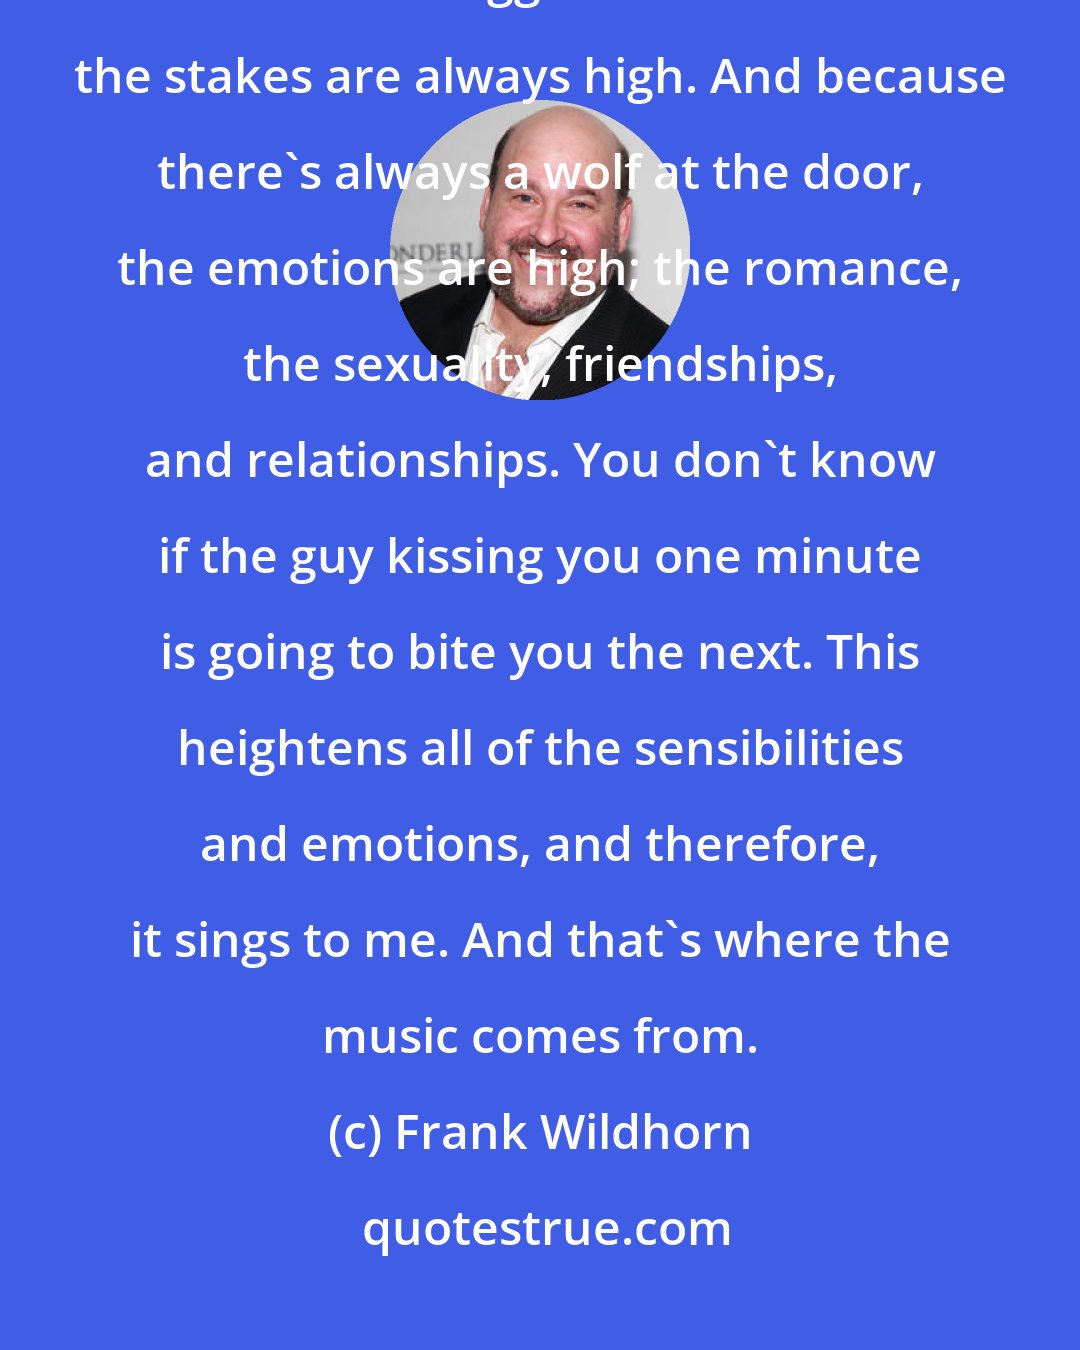 Frank Wildhorn: I love the gothic literature. It always has such great stories with characters bigger than life and the stakes are always high. And because there's always a wolf at the door, the emotions are high; the romance, the sexuality, friendships, and relationships. You don't know if the guy kissing you one minute is going to bite you the next. This heightens all of the sensibilities and emotions, and therefore, it sings to me. And that's where the music comes from.